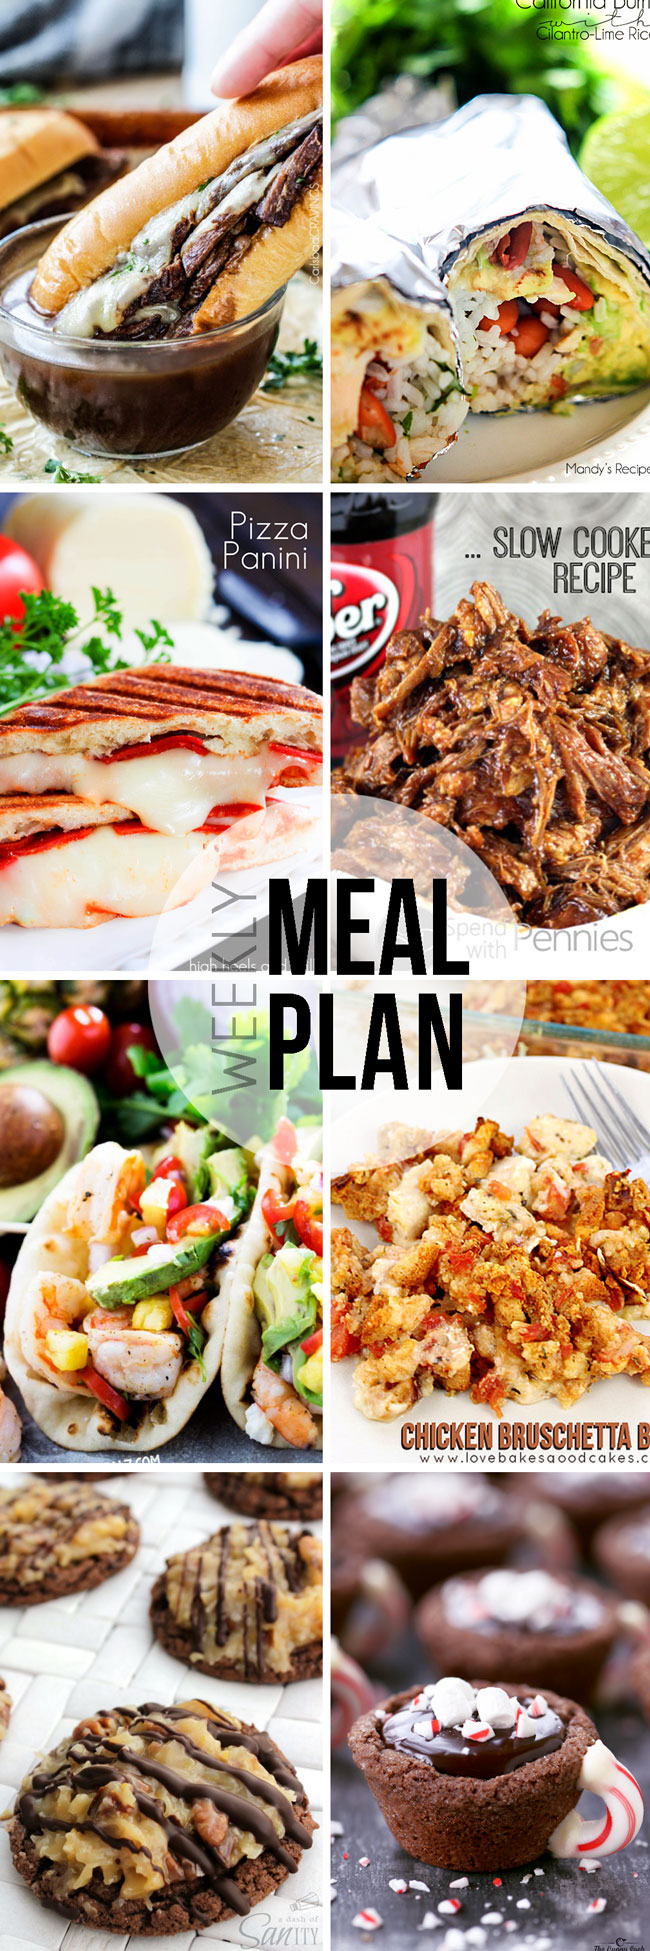 Easy Meal Plan Sunday #26